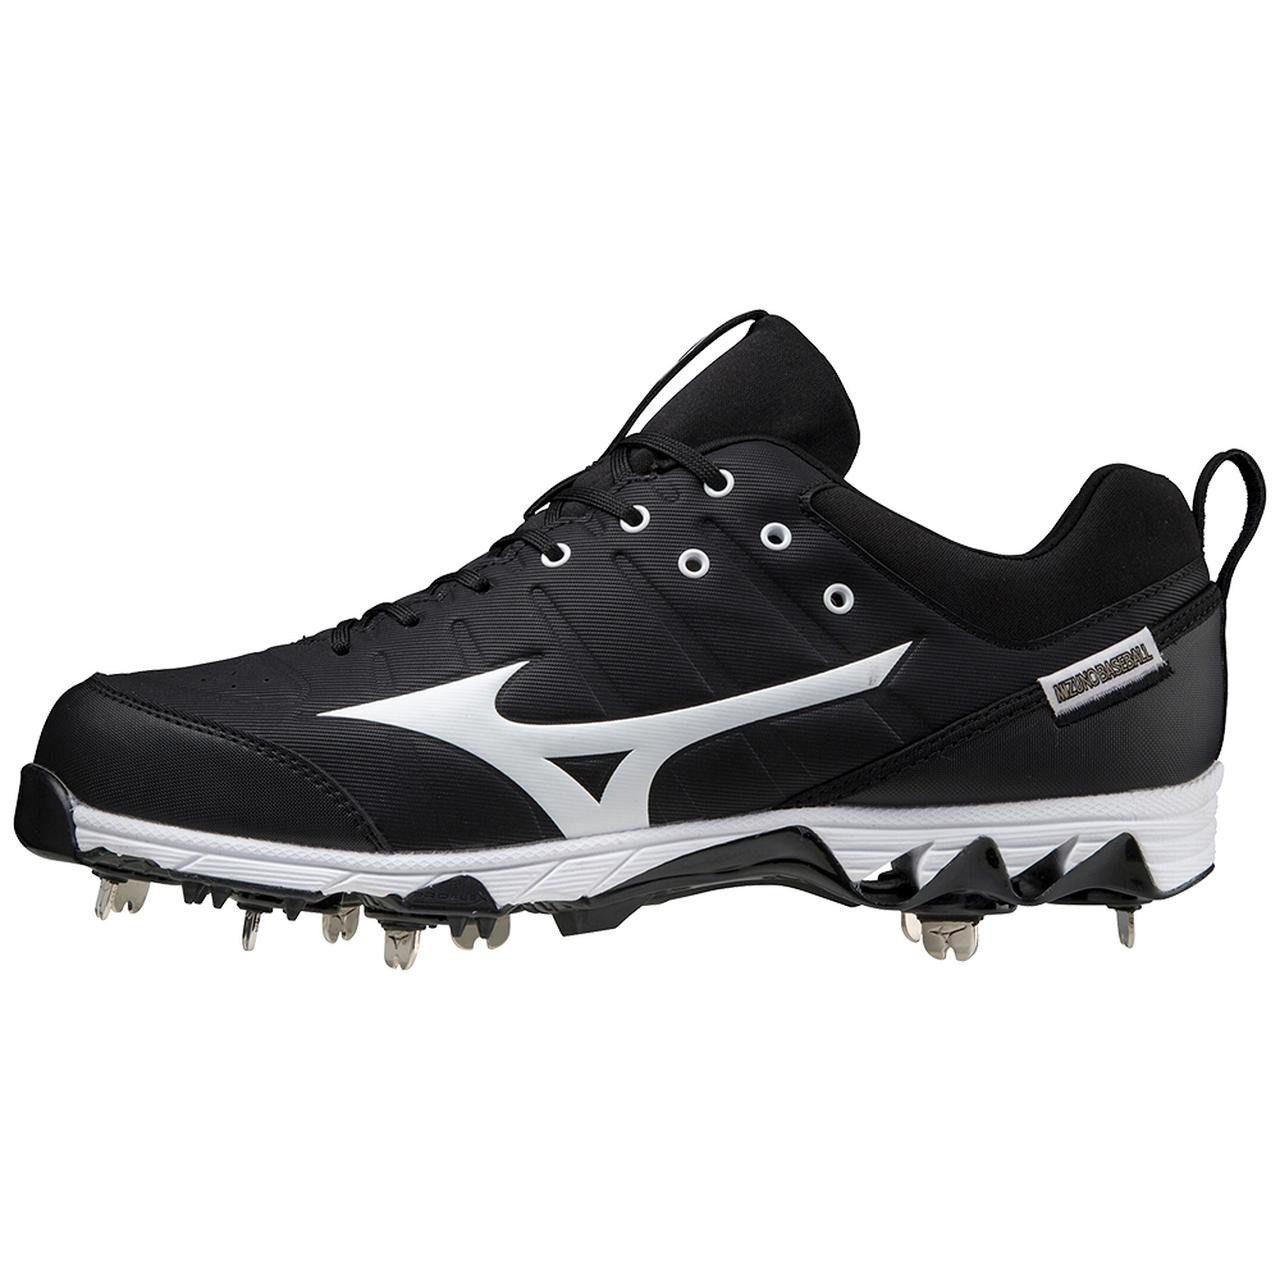 9-Spike® Ambition 2 Low Men's Metal Baseball Cleat